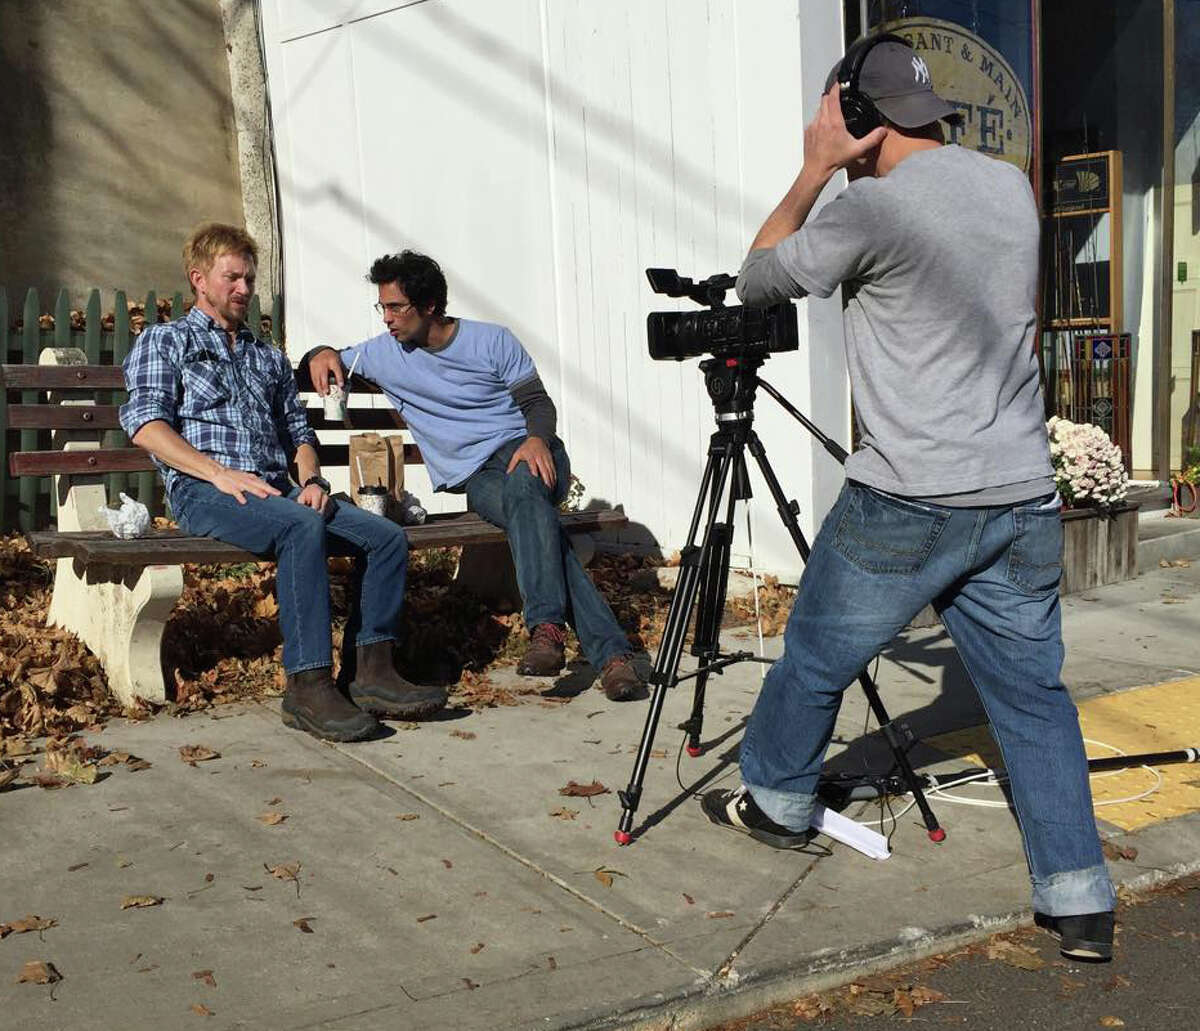 From left, Michael Burnett, David Joseph and, at camera, Billy Hahn shooting a scene from the movie ultra-low-budget movie "Penny Land," shot largely in the Berkshires with regional actors. It is now available on Amazon.com.